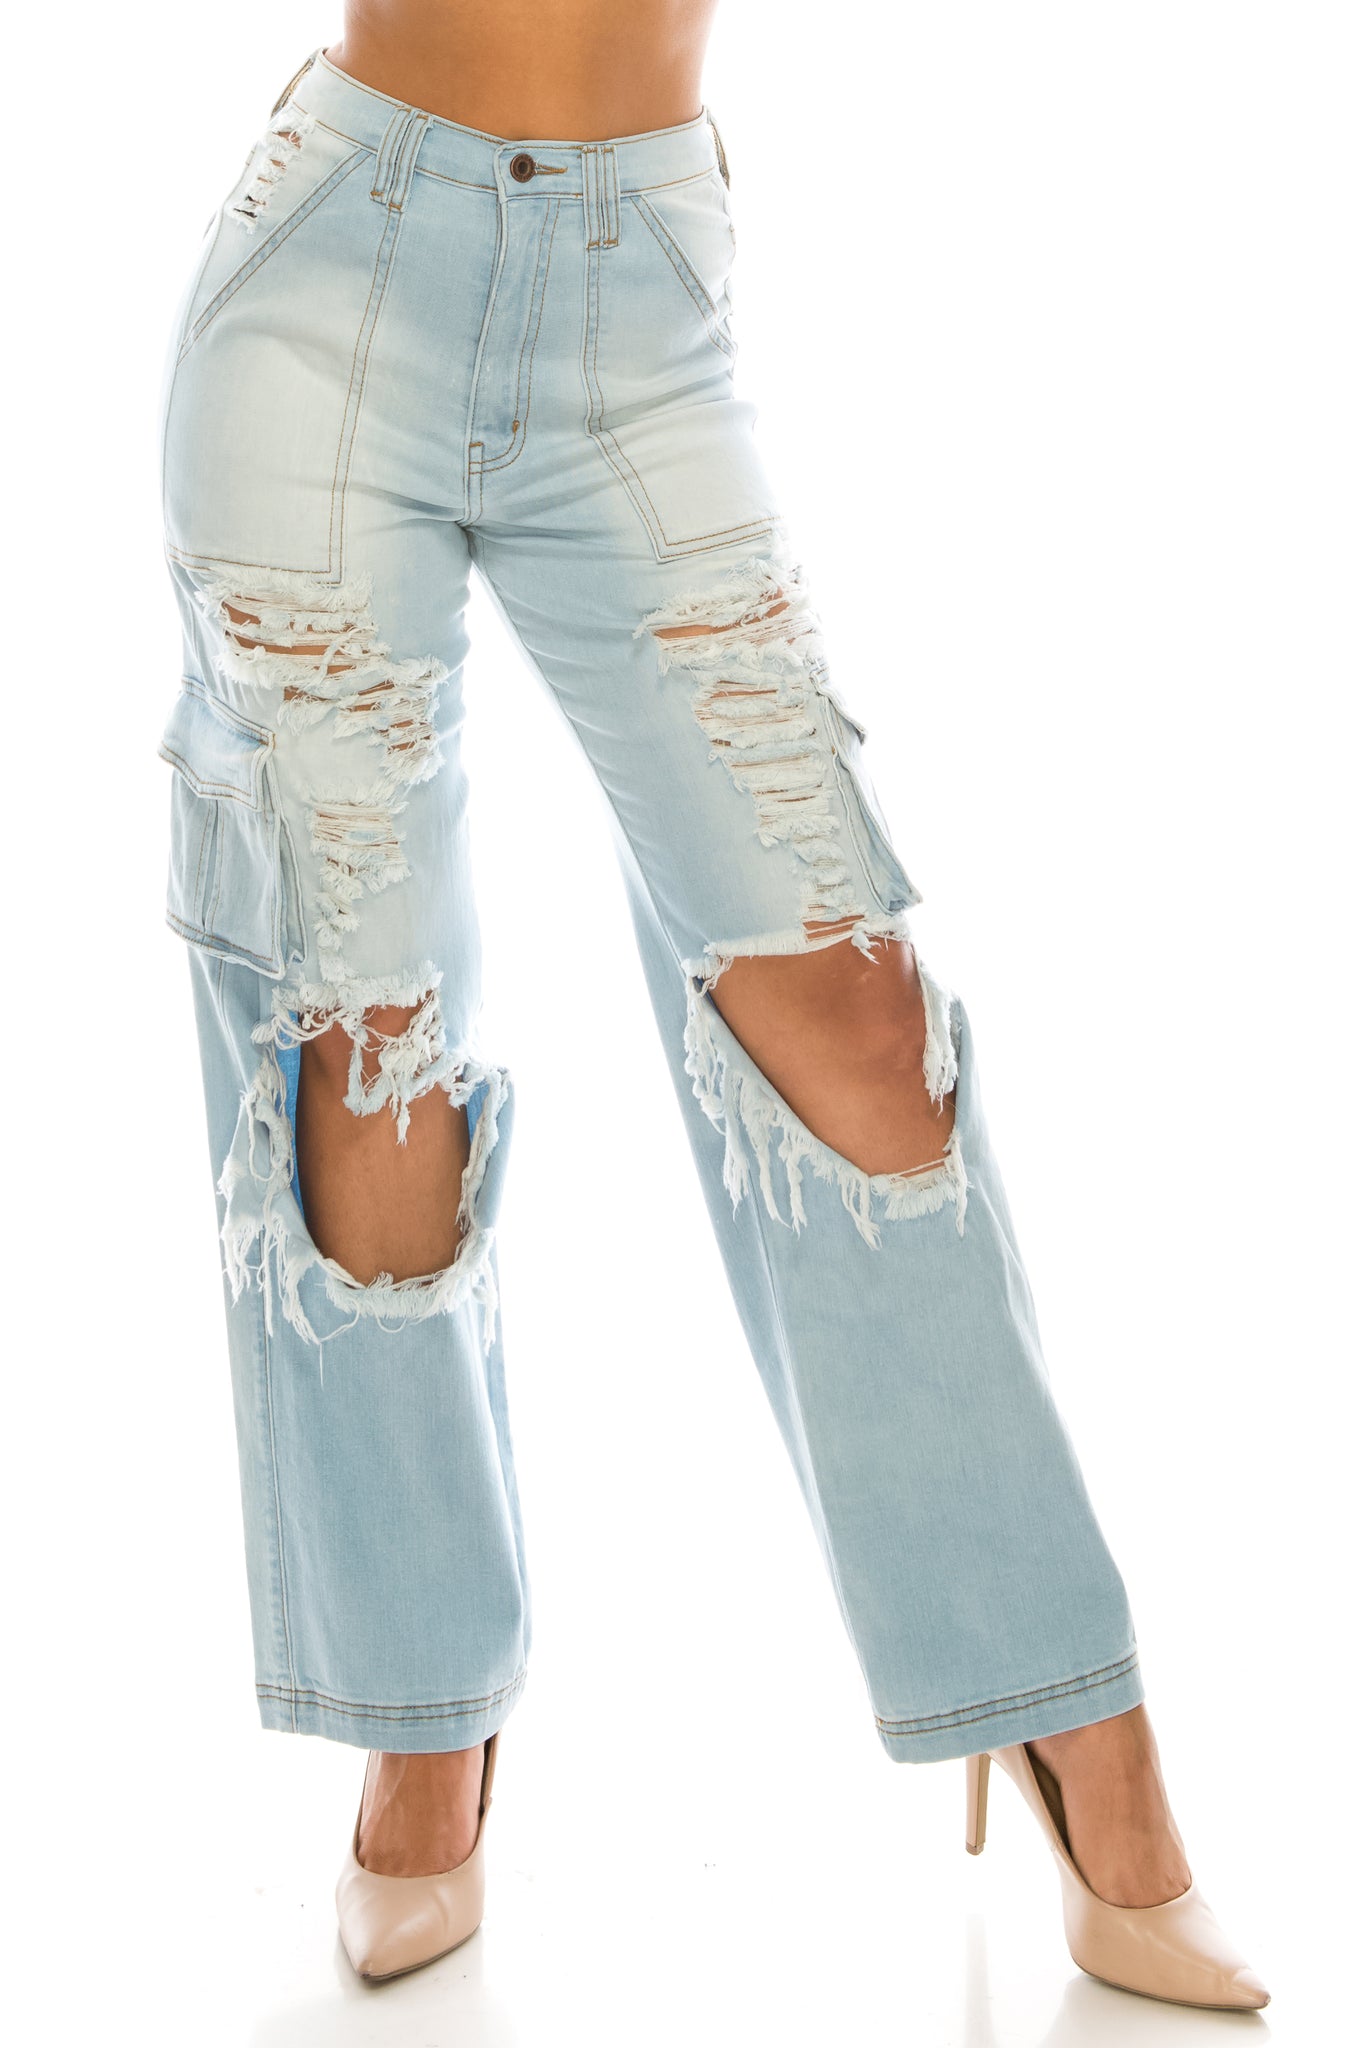 Loose Jeans for Women Women's High Waisted Jeans Straight Ripped